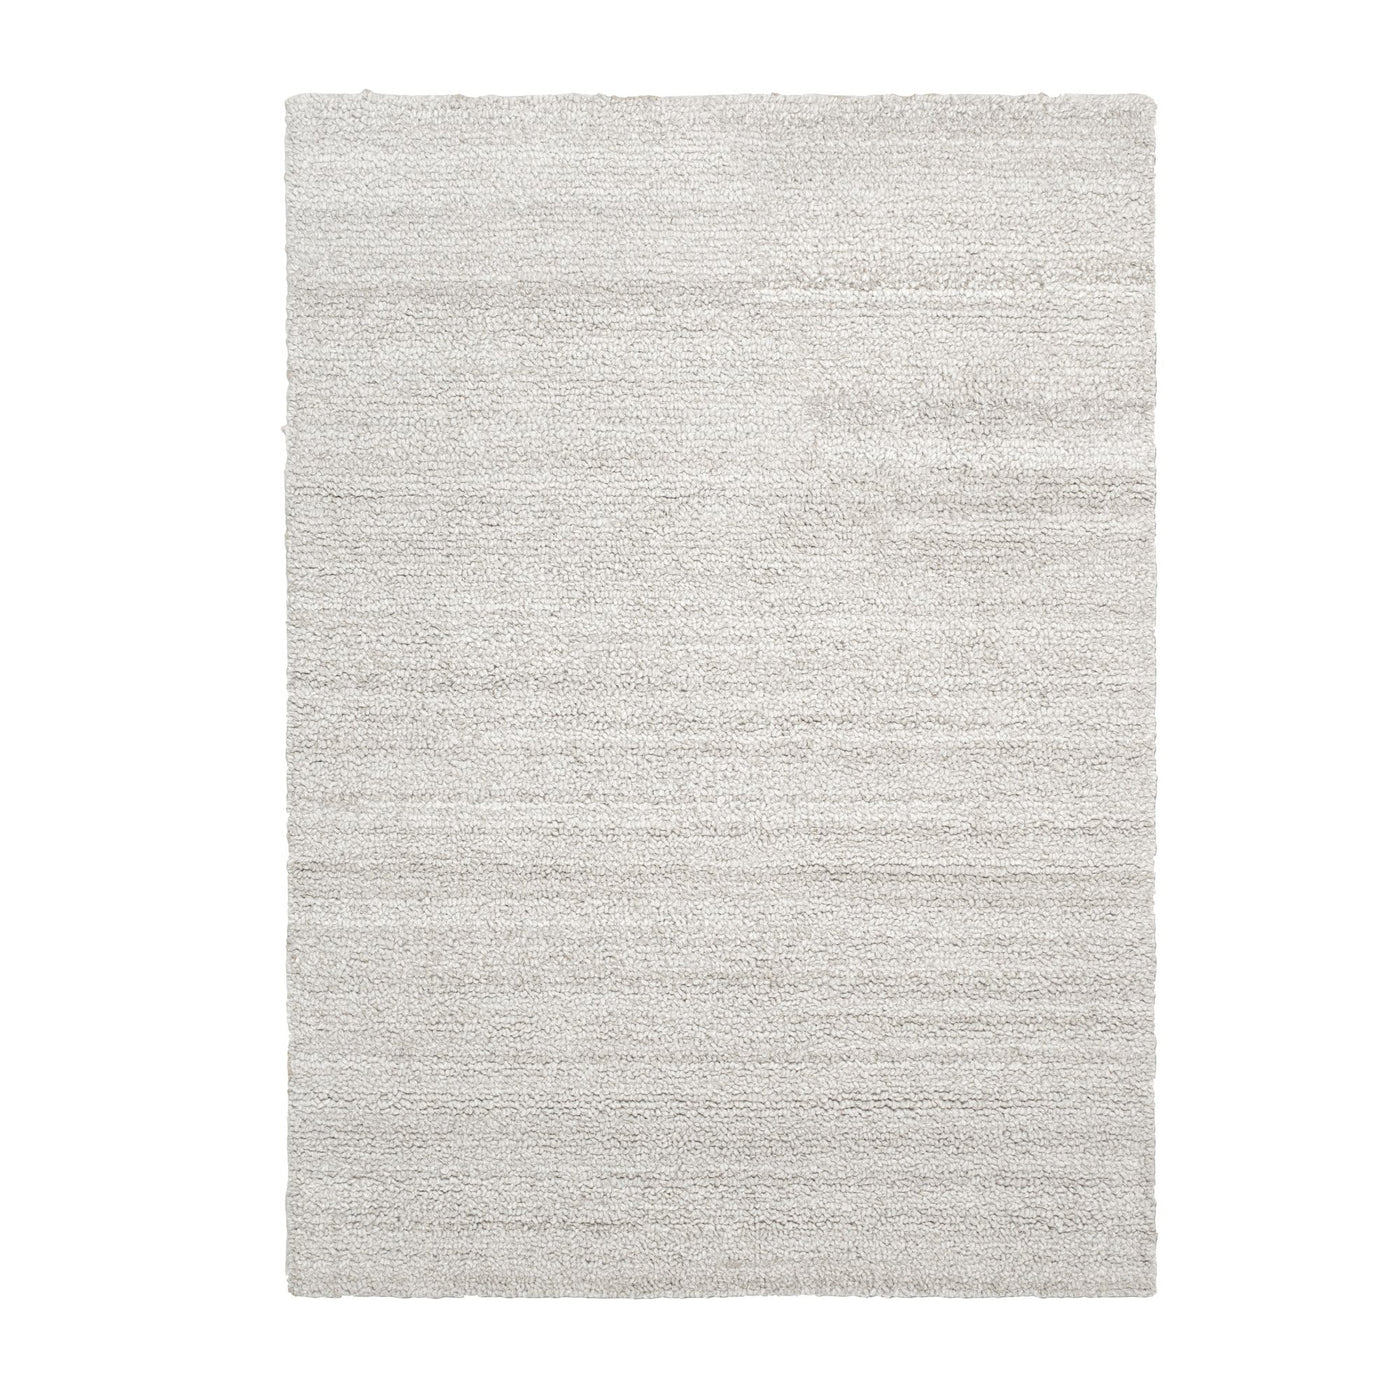 ferm living ease loop rug 200x300, available from someday designs